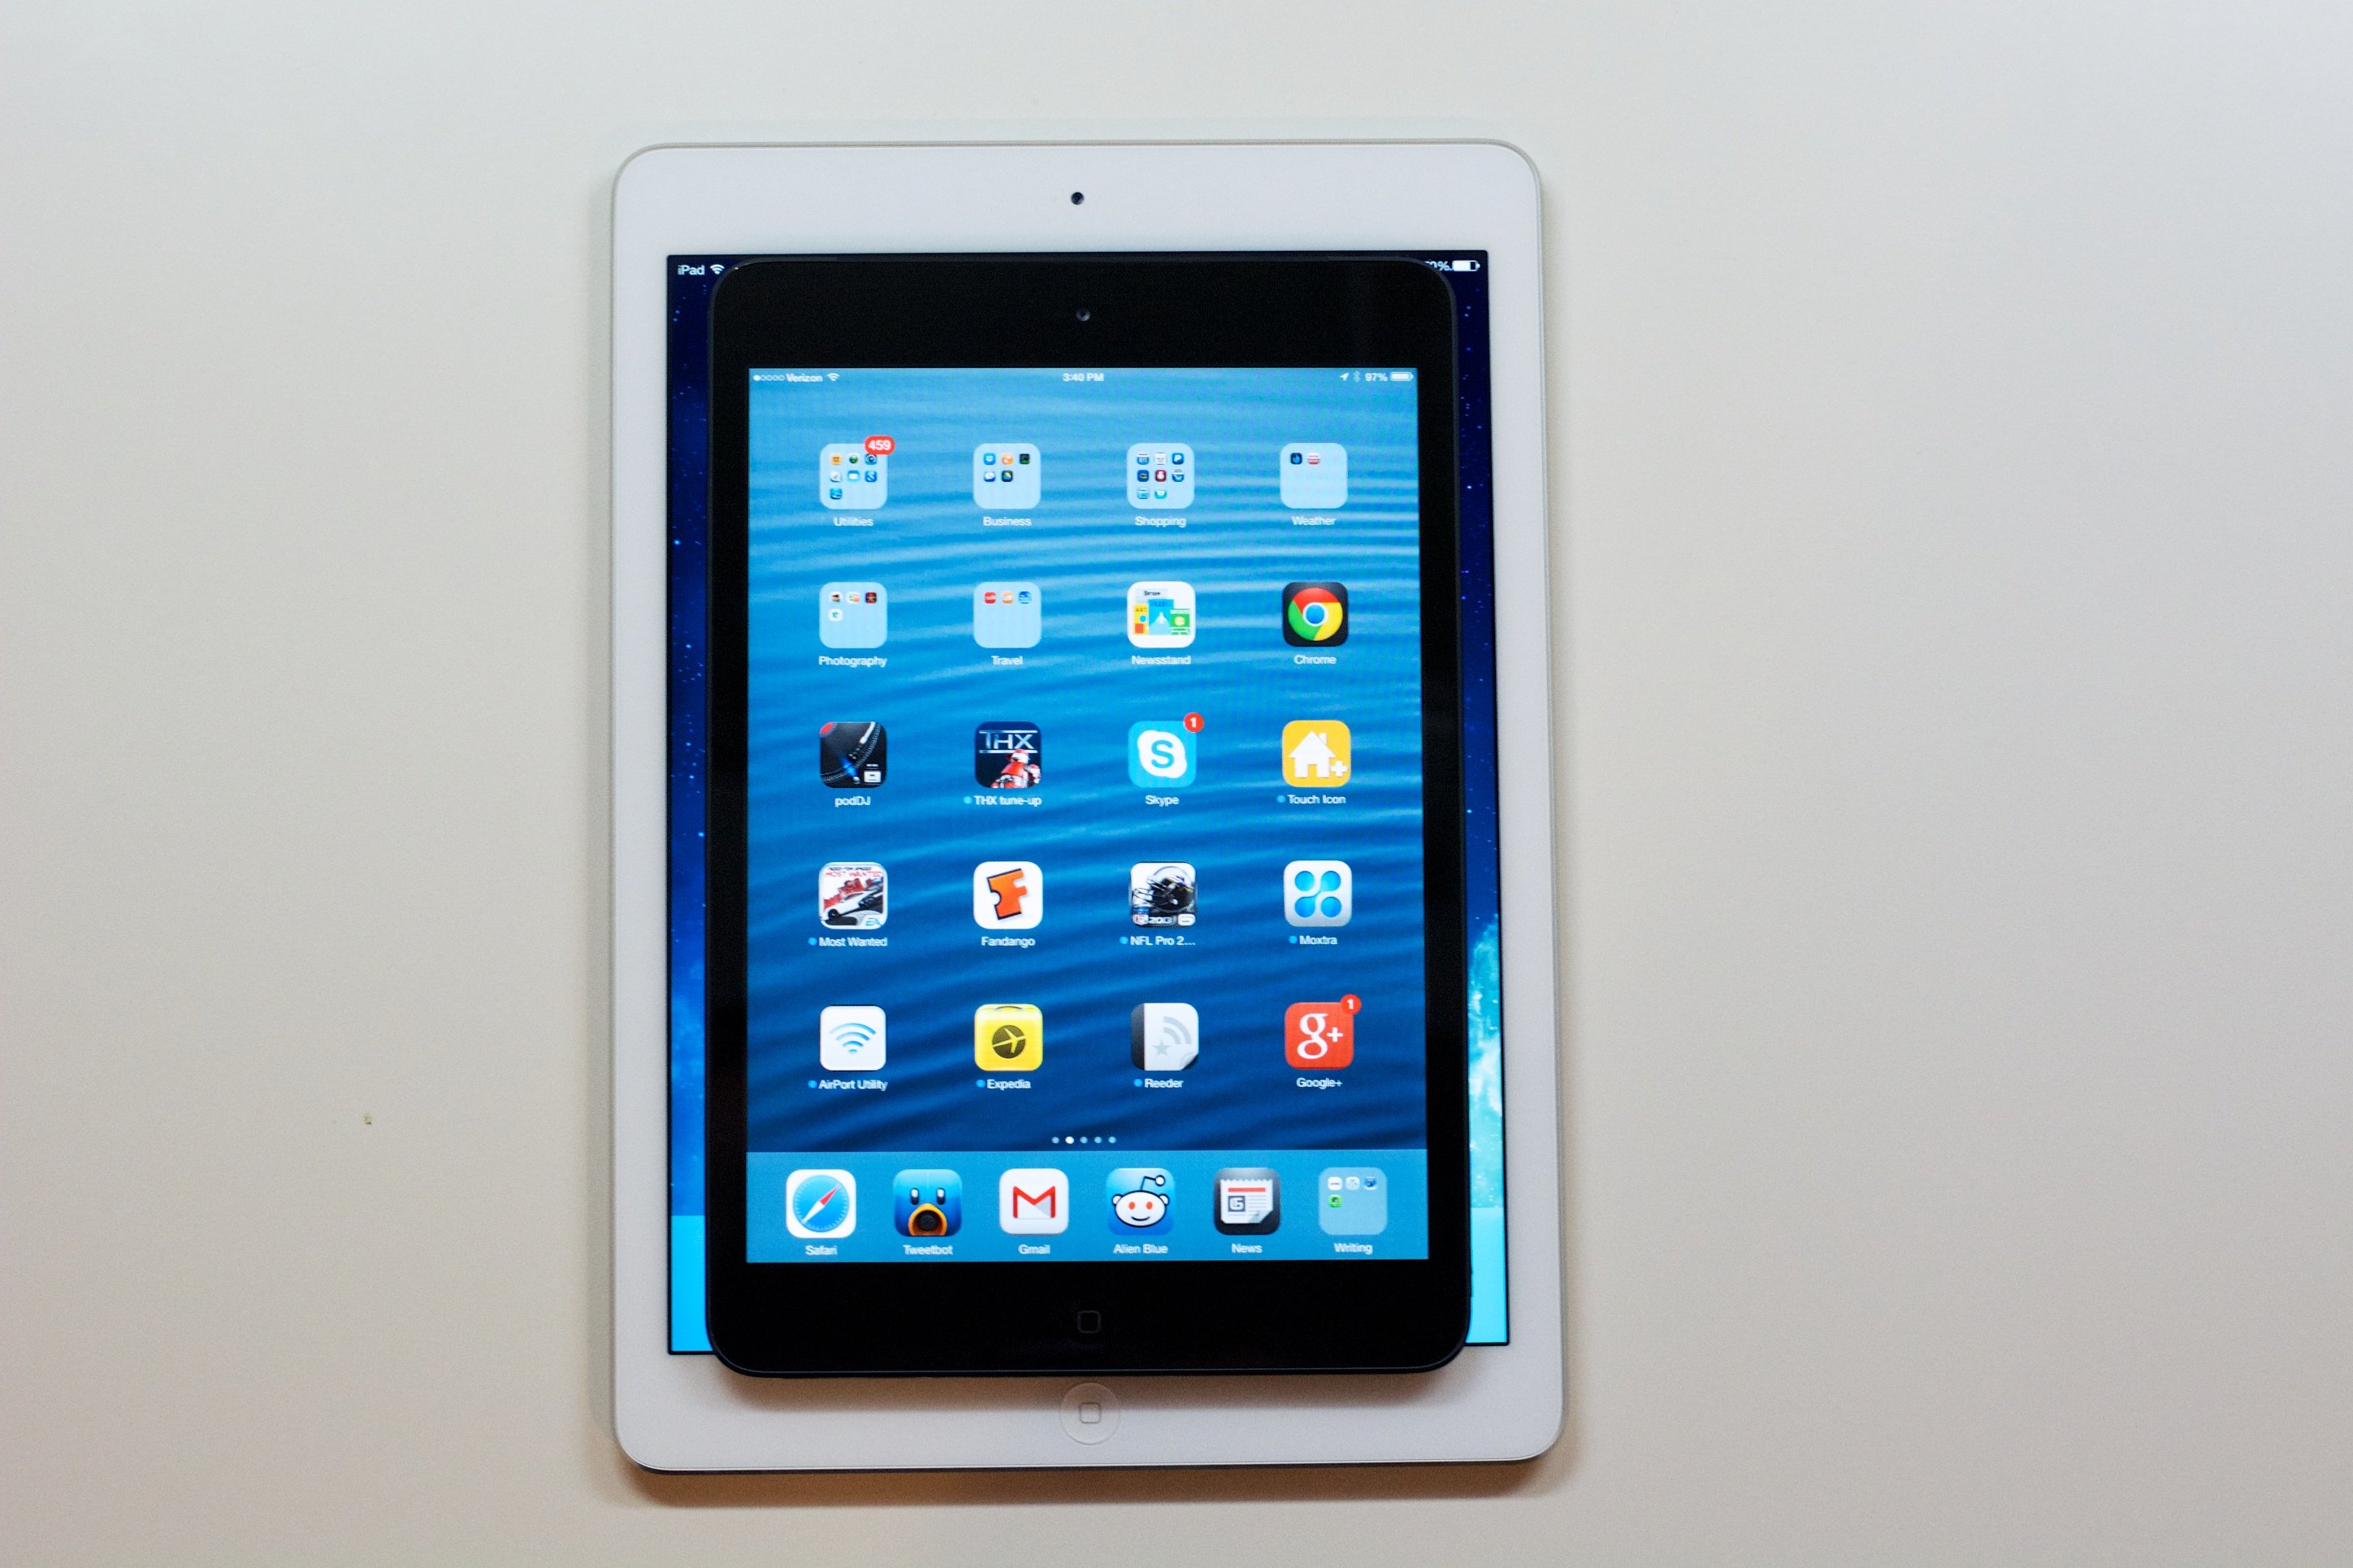 Ipad mini with retina display review android authority super php curl bearer